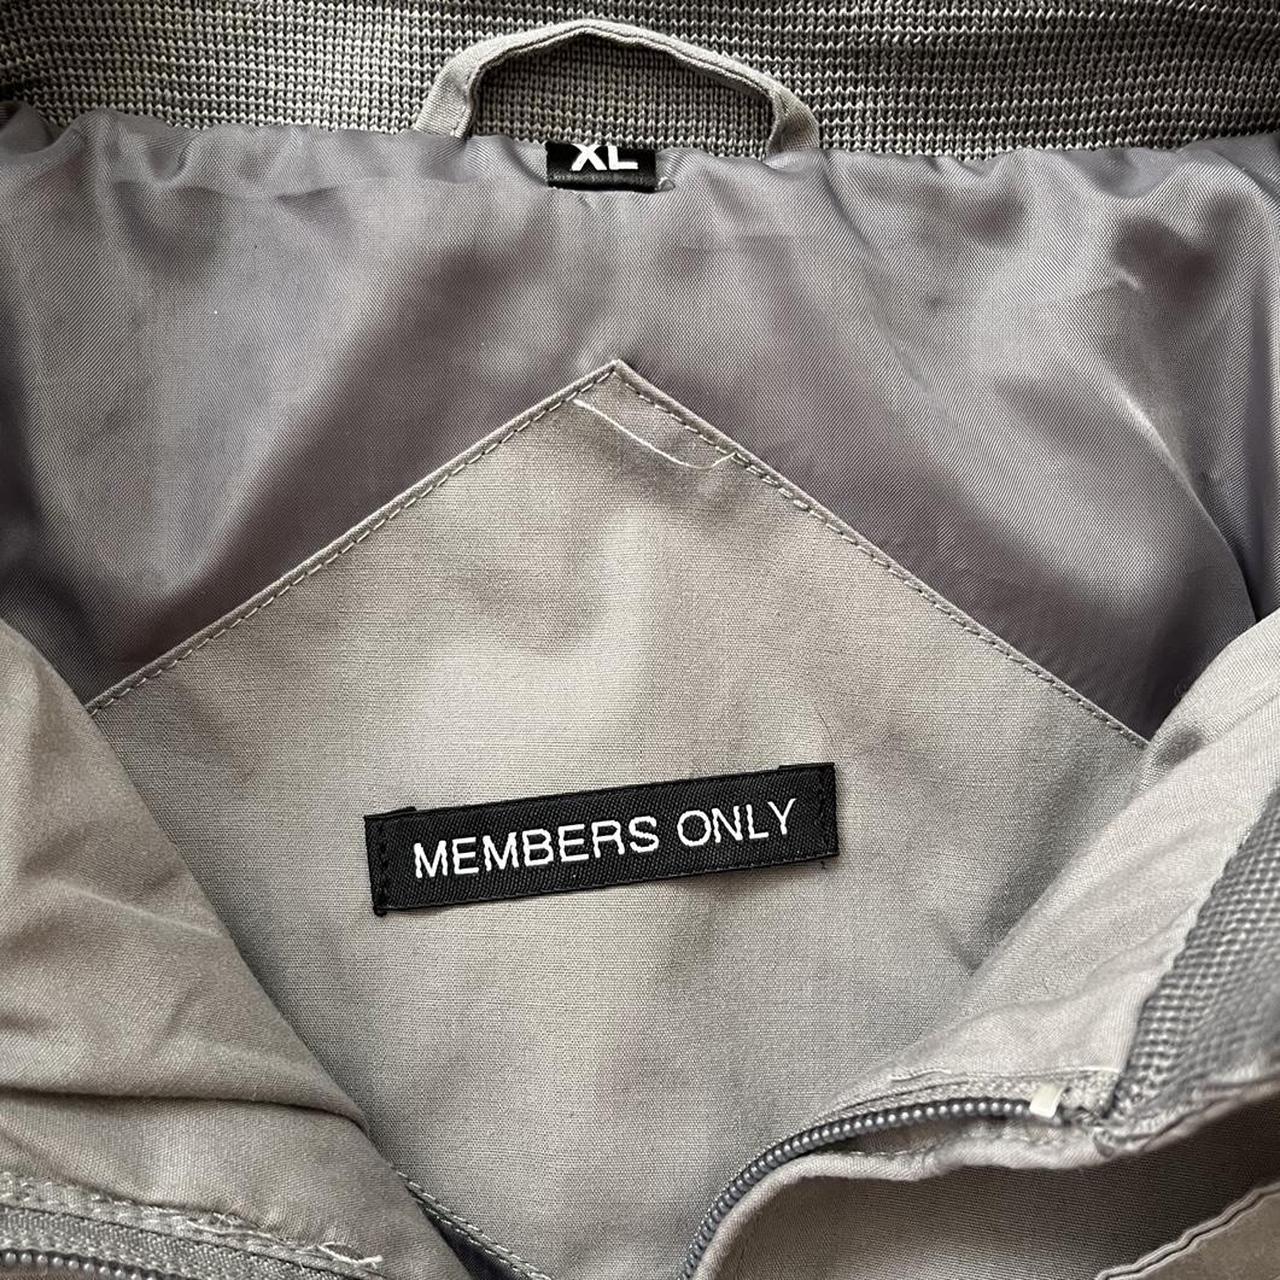 Product Image 3 - 80s Gray Members Only Jacket
FREE